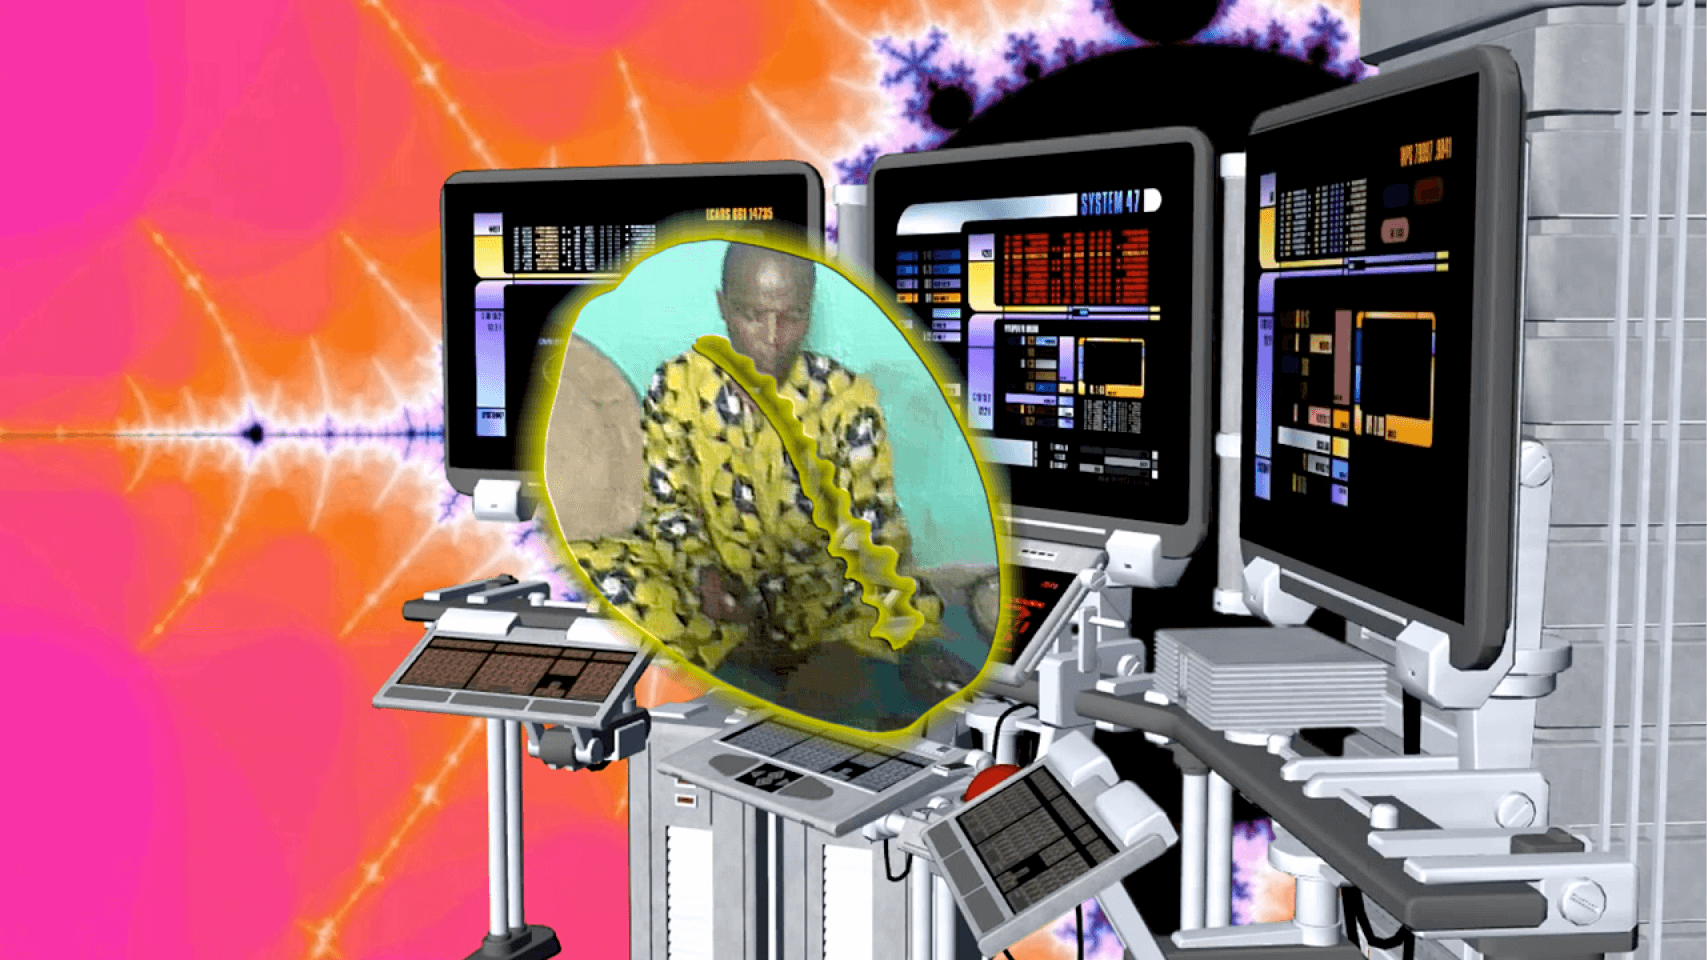 An orange and pink fractal with 3D imagery of computers and a portal opening to reveal an African person in traditional clothing.